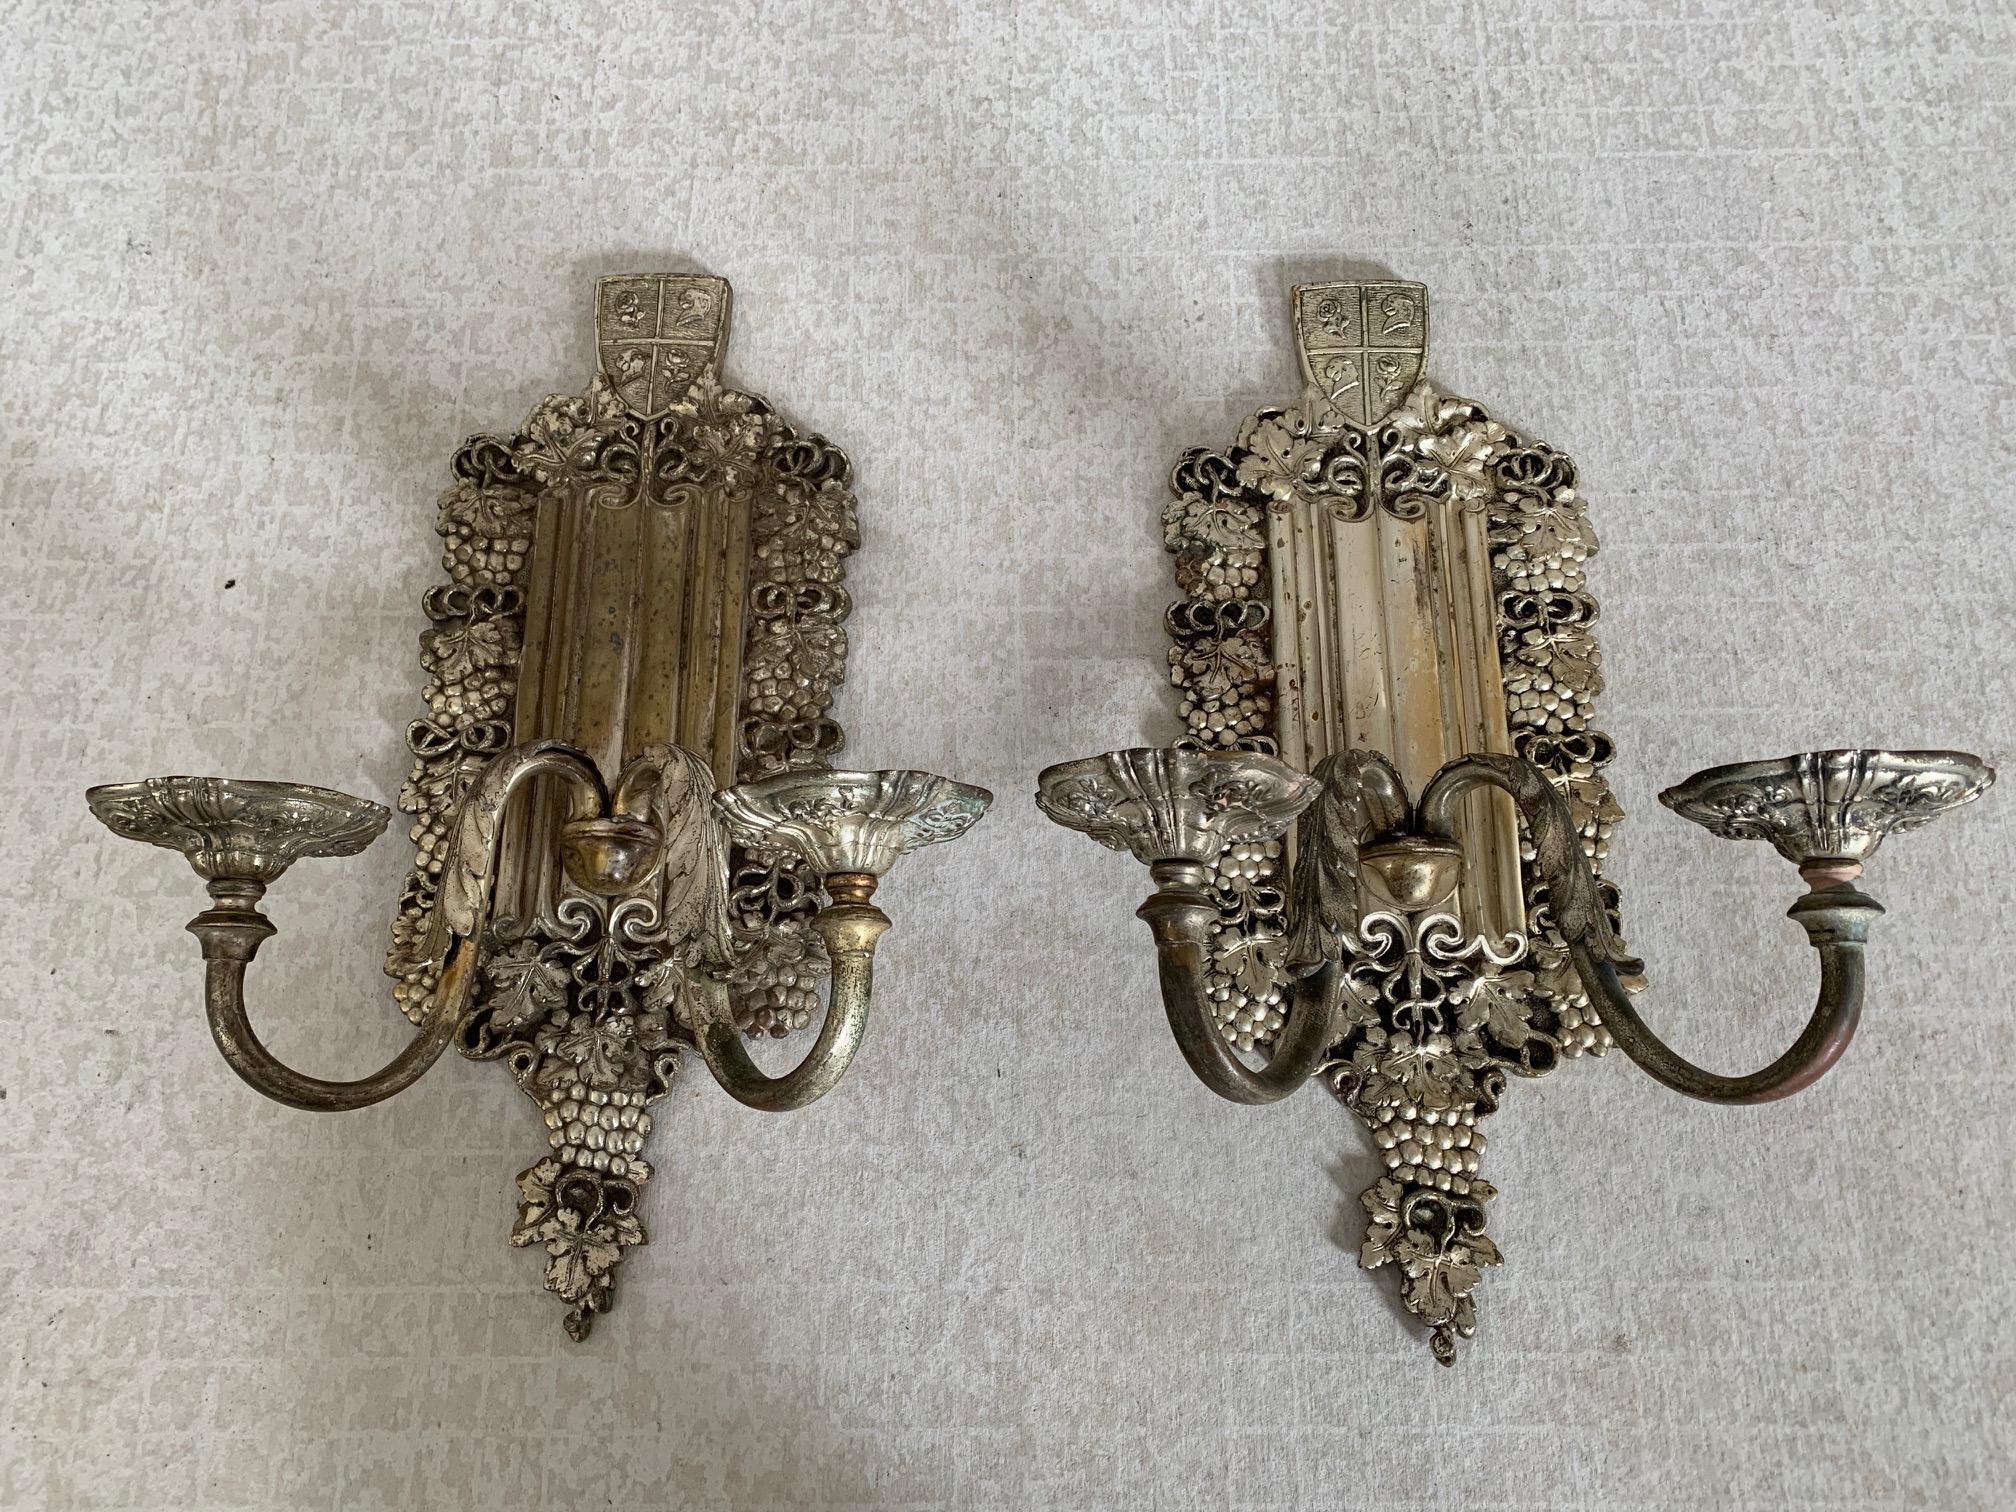 Silver plated bronze, 2-arm sconces with grape border, linen-fold backplate and heraldic griffin and rose shield.
Attributed to E. F.Caldwell, New York, circa 1925.
Plating is worn in areas but largely intact. Custom wiring inclusive.